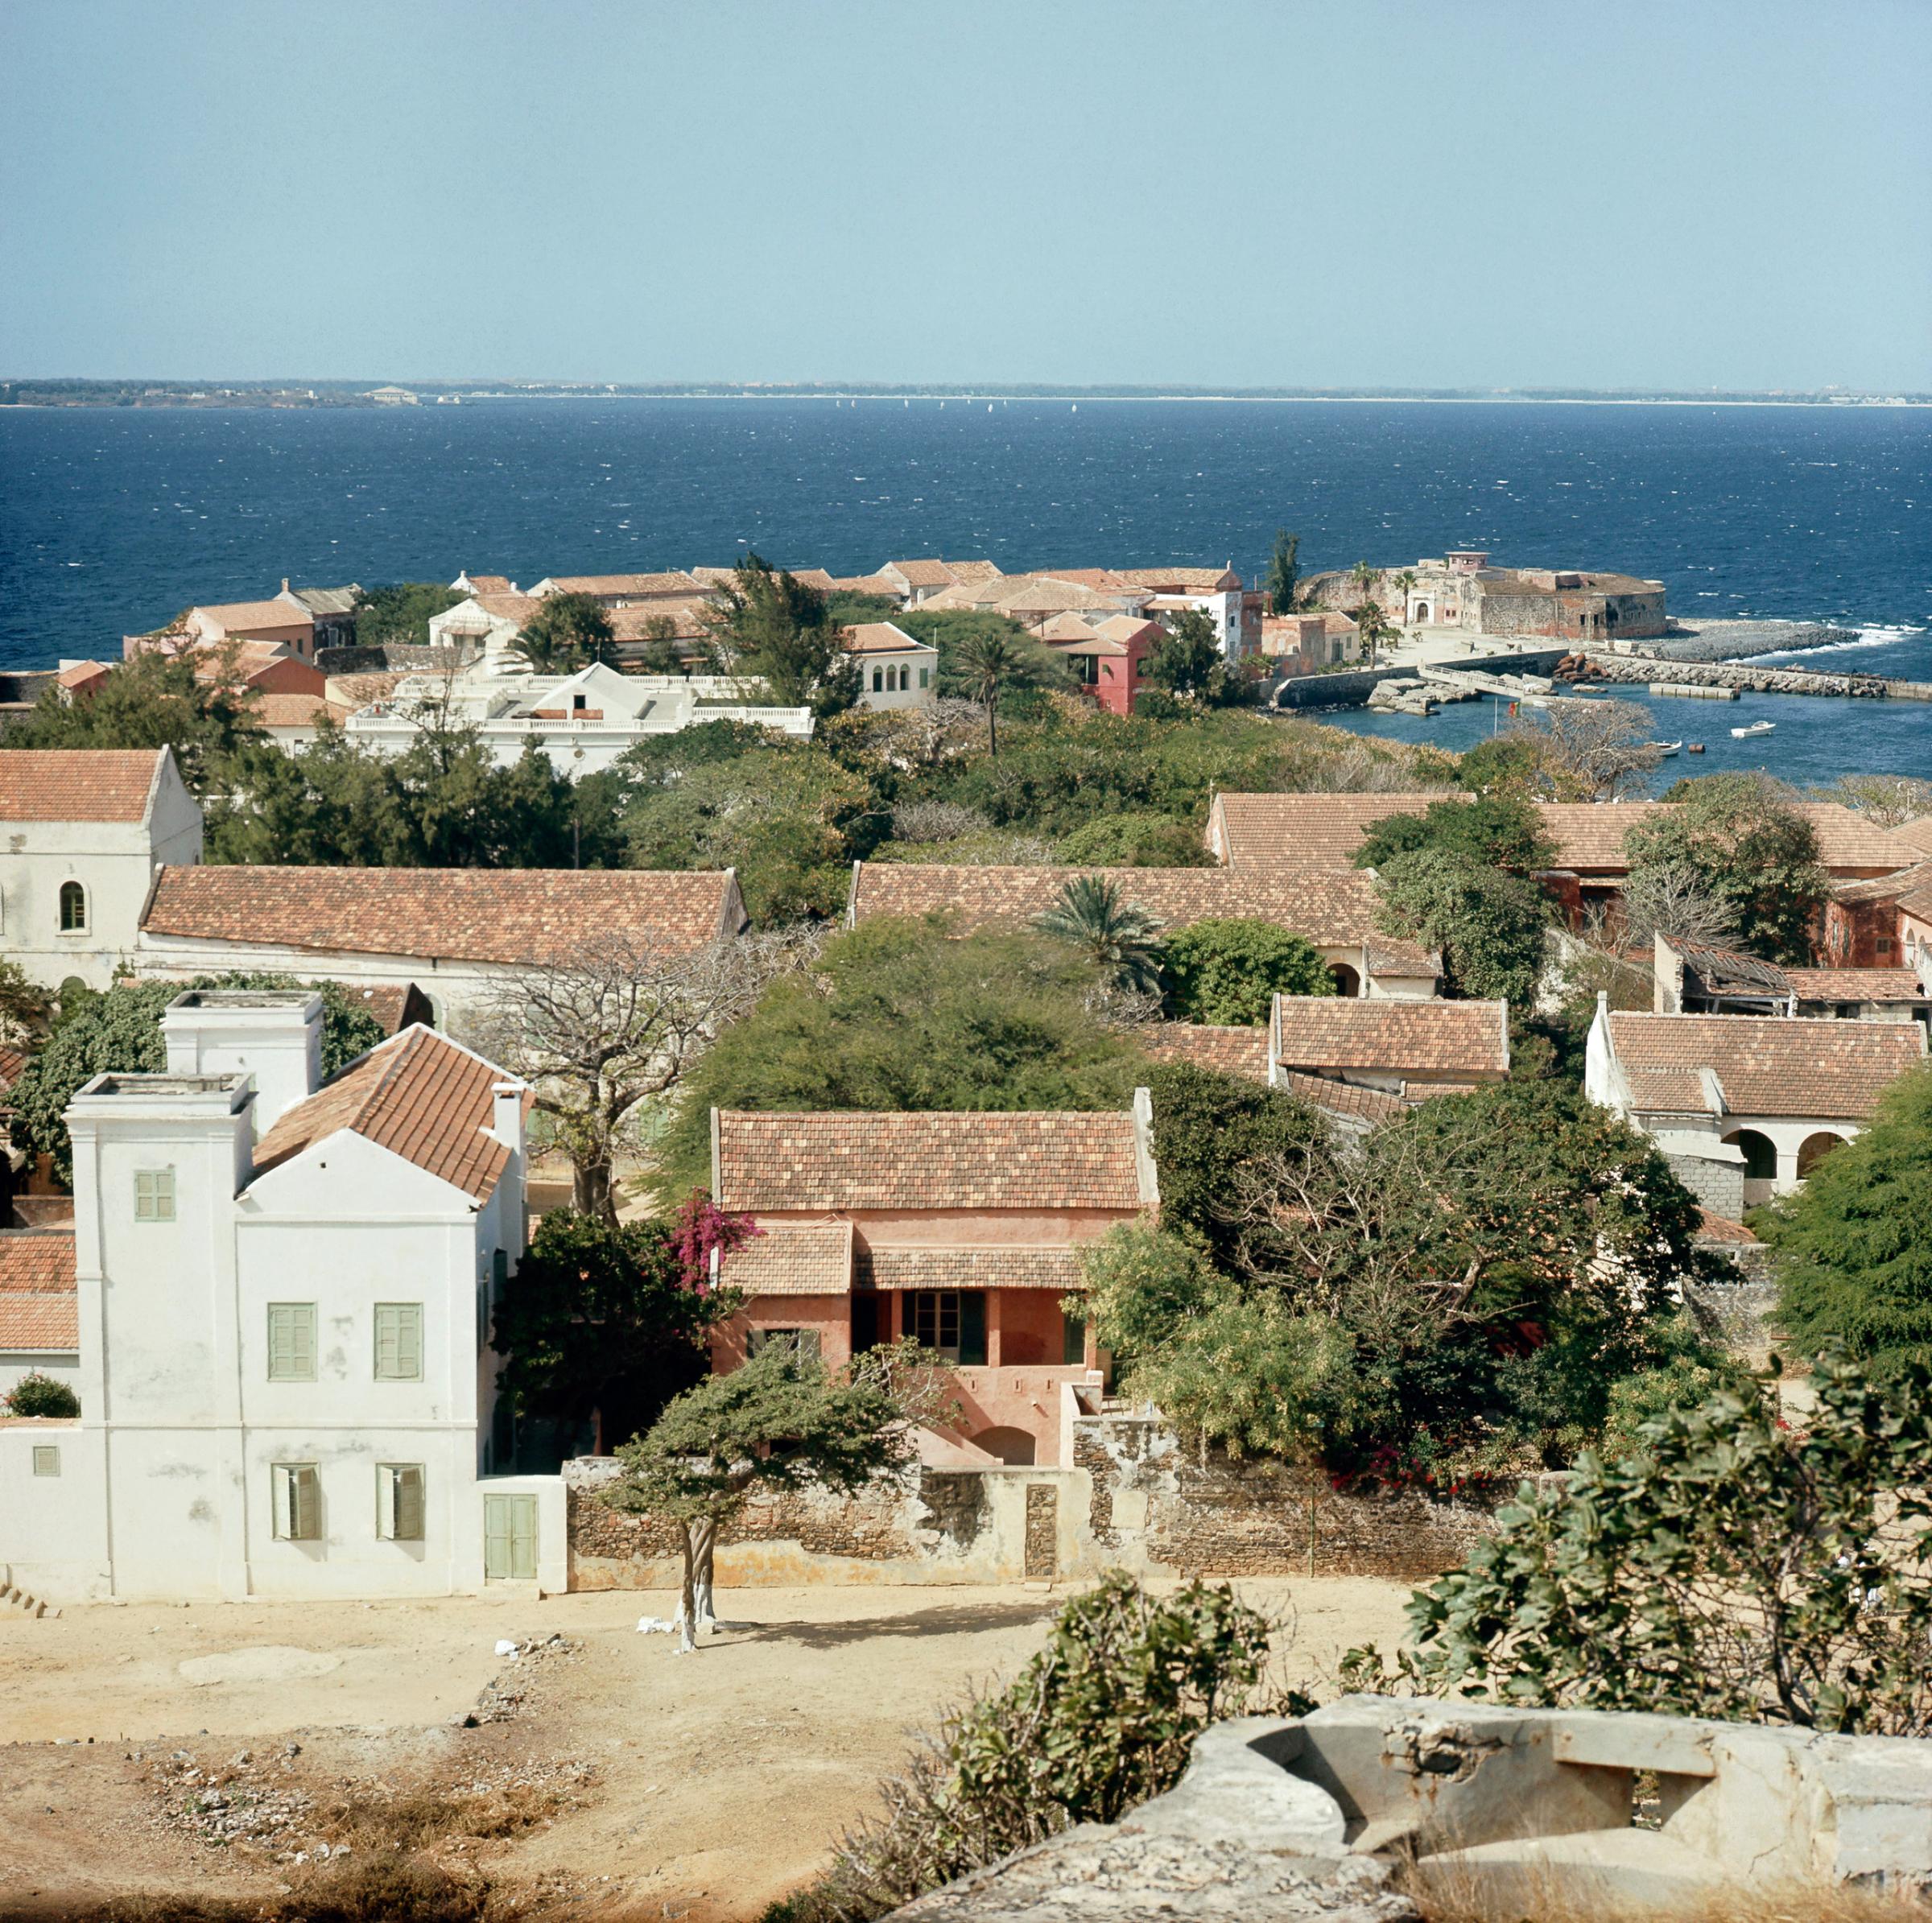 View of the town on Goree Island, off Cape Verde, an important selling-station for the Atlantic slave trade